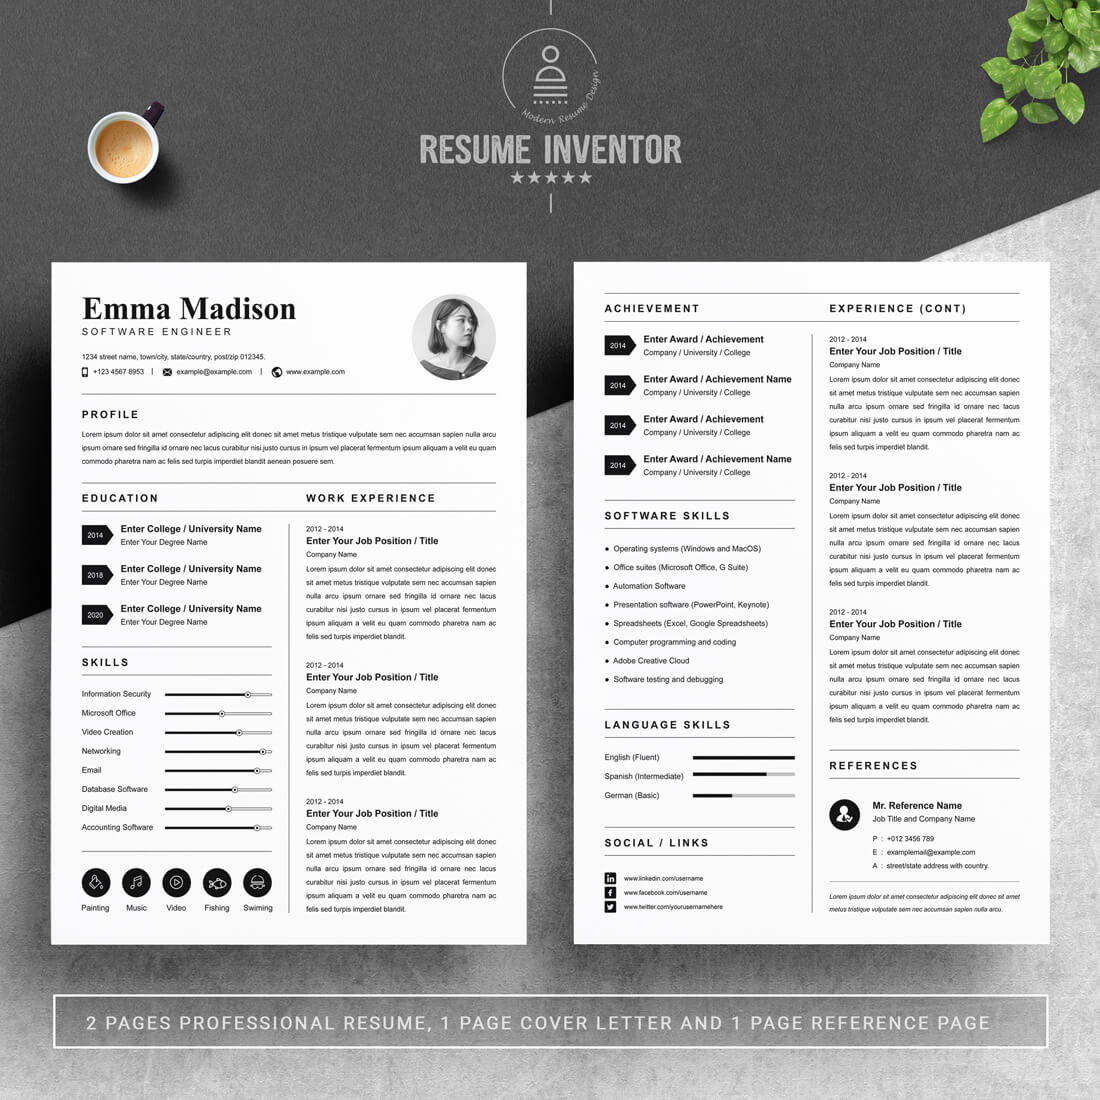 Software Engineer Resume Template | Application Developer Resume Template cover image.